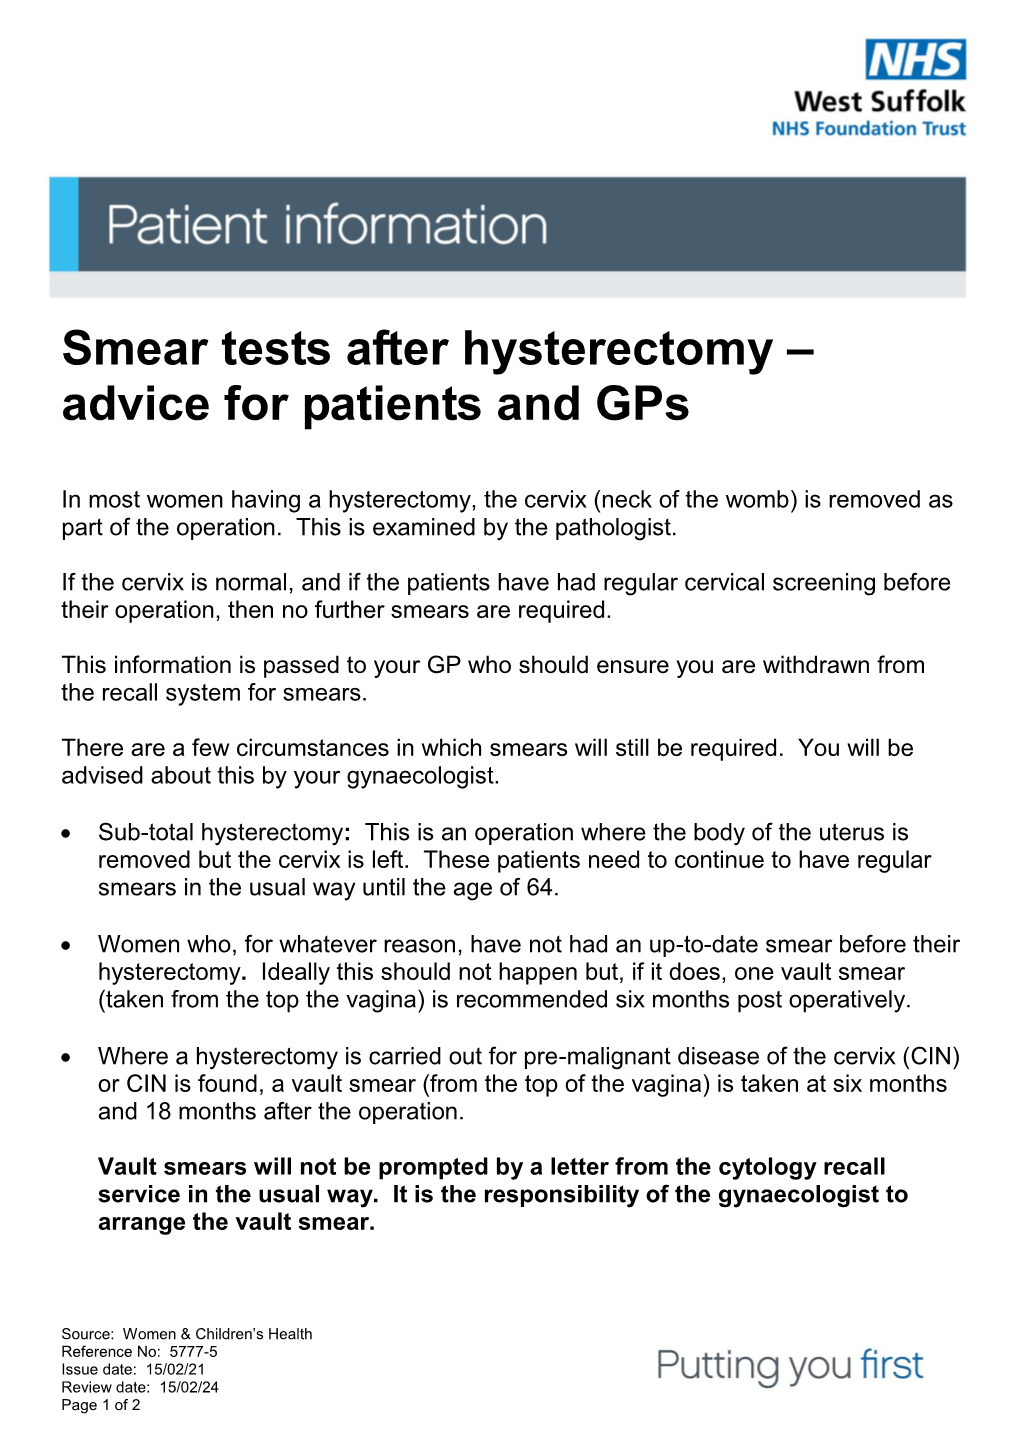 Smear Tests After Hysterectomy – Advice for Patients and Gps